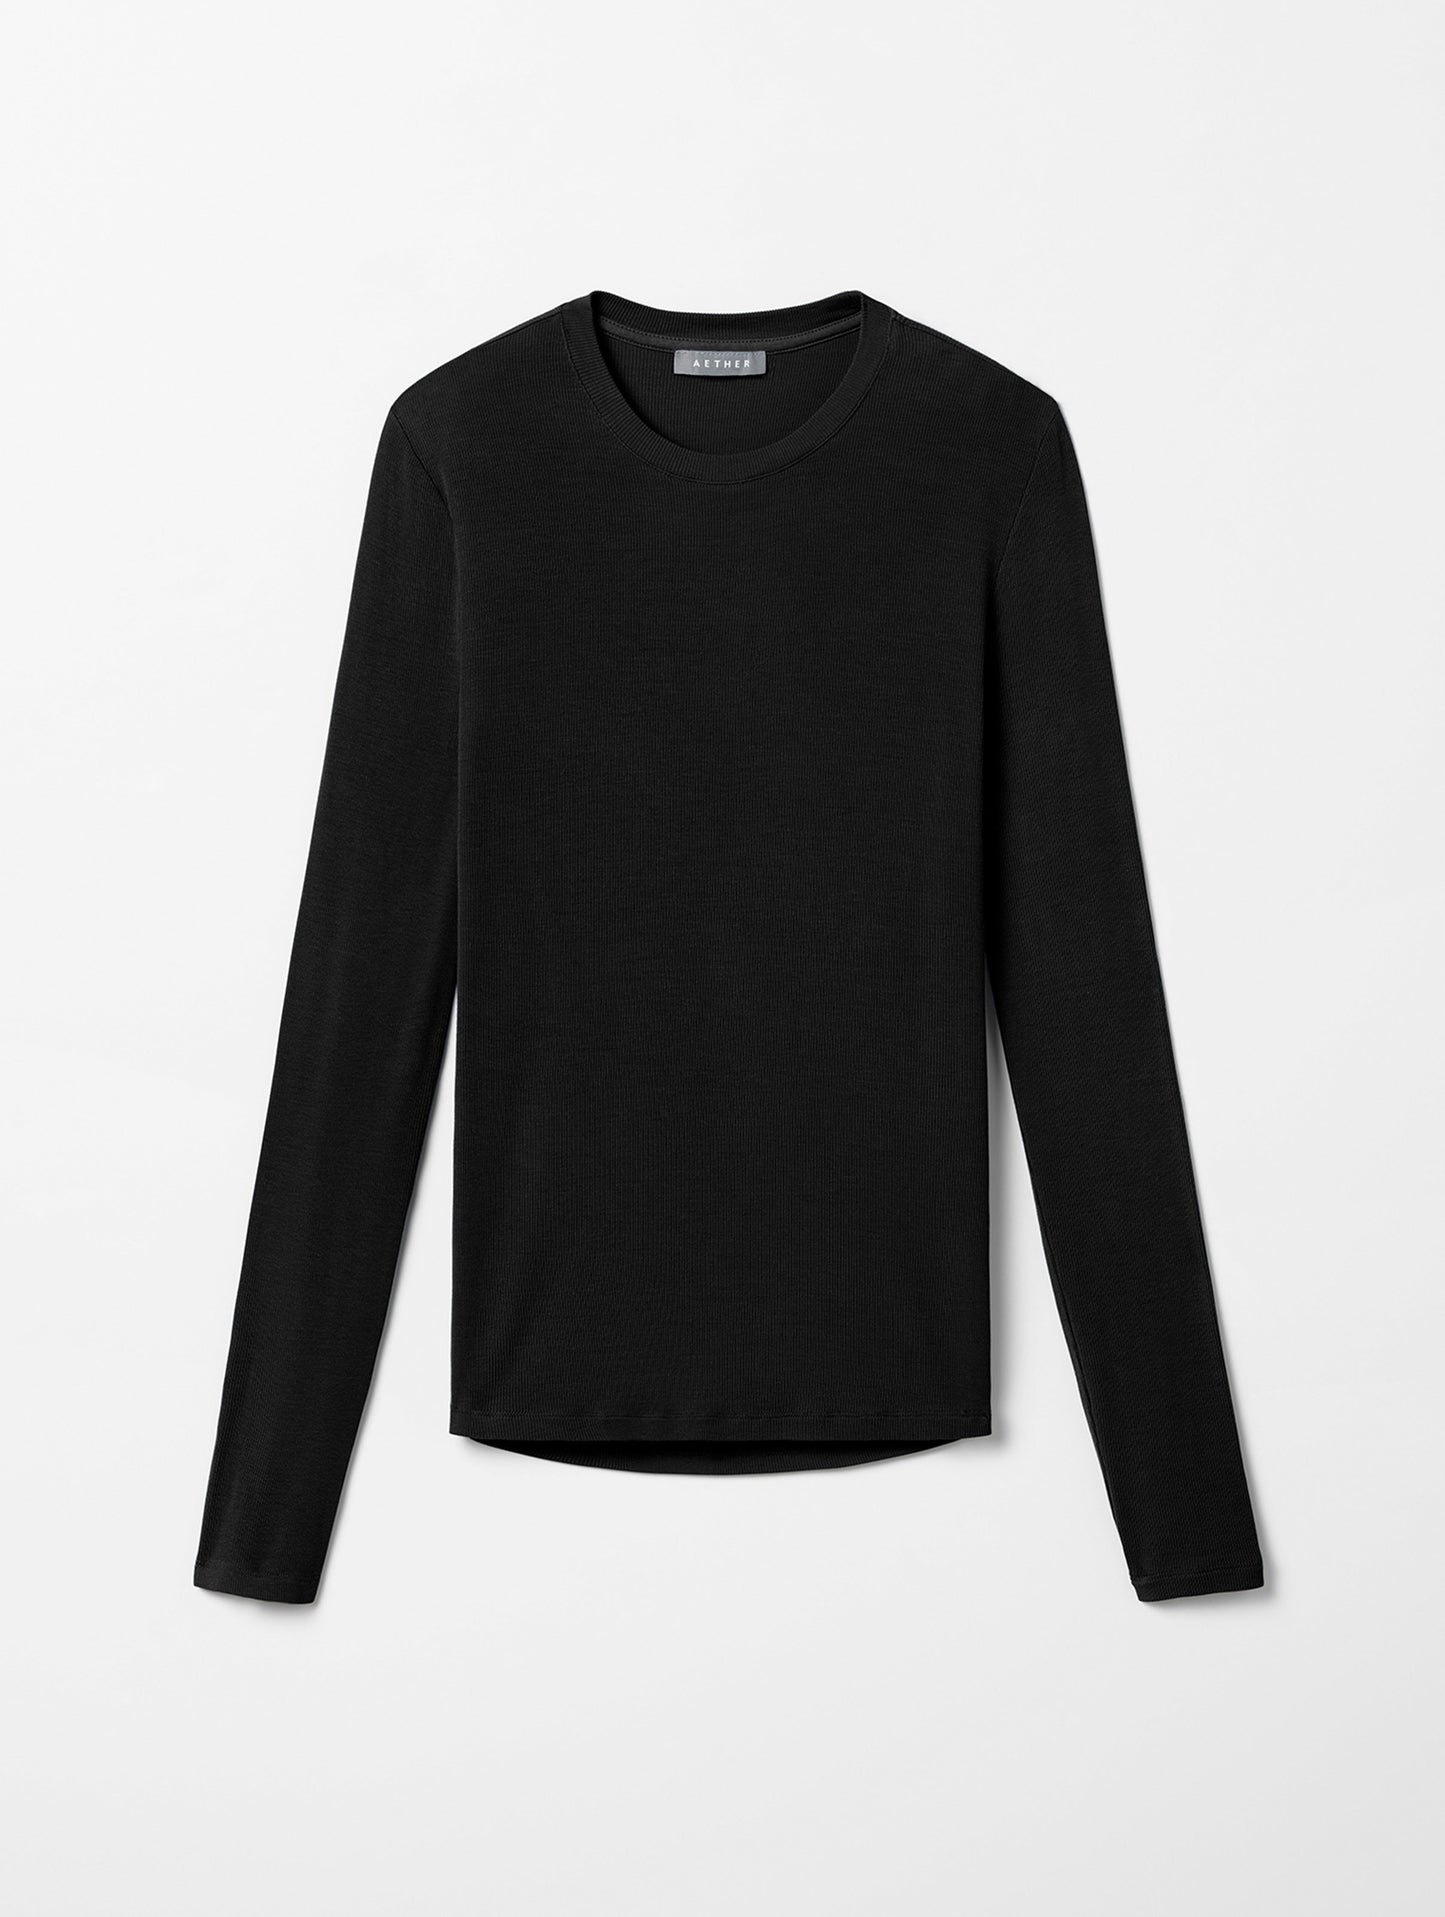 long-sleeve shirt for women from Aether Apparel